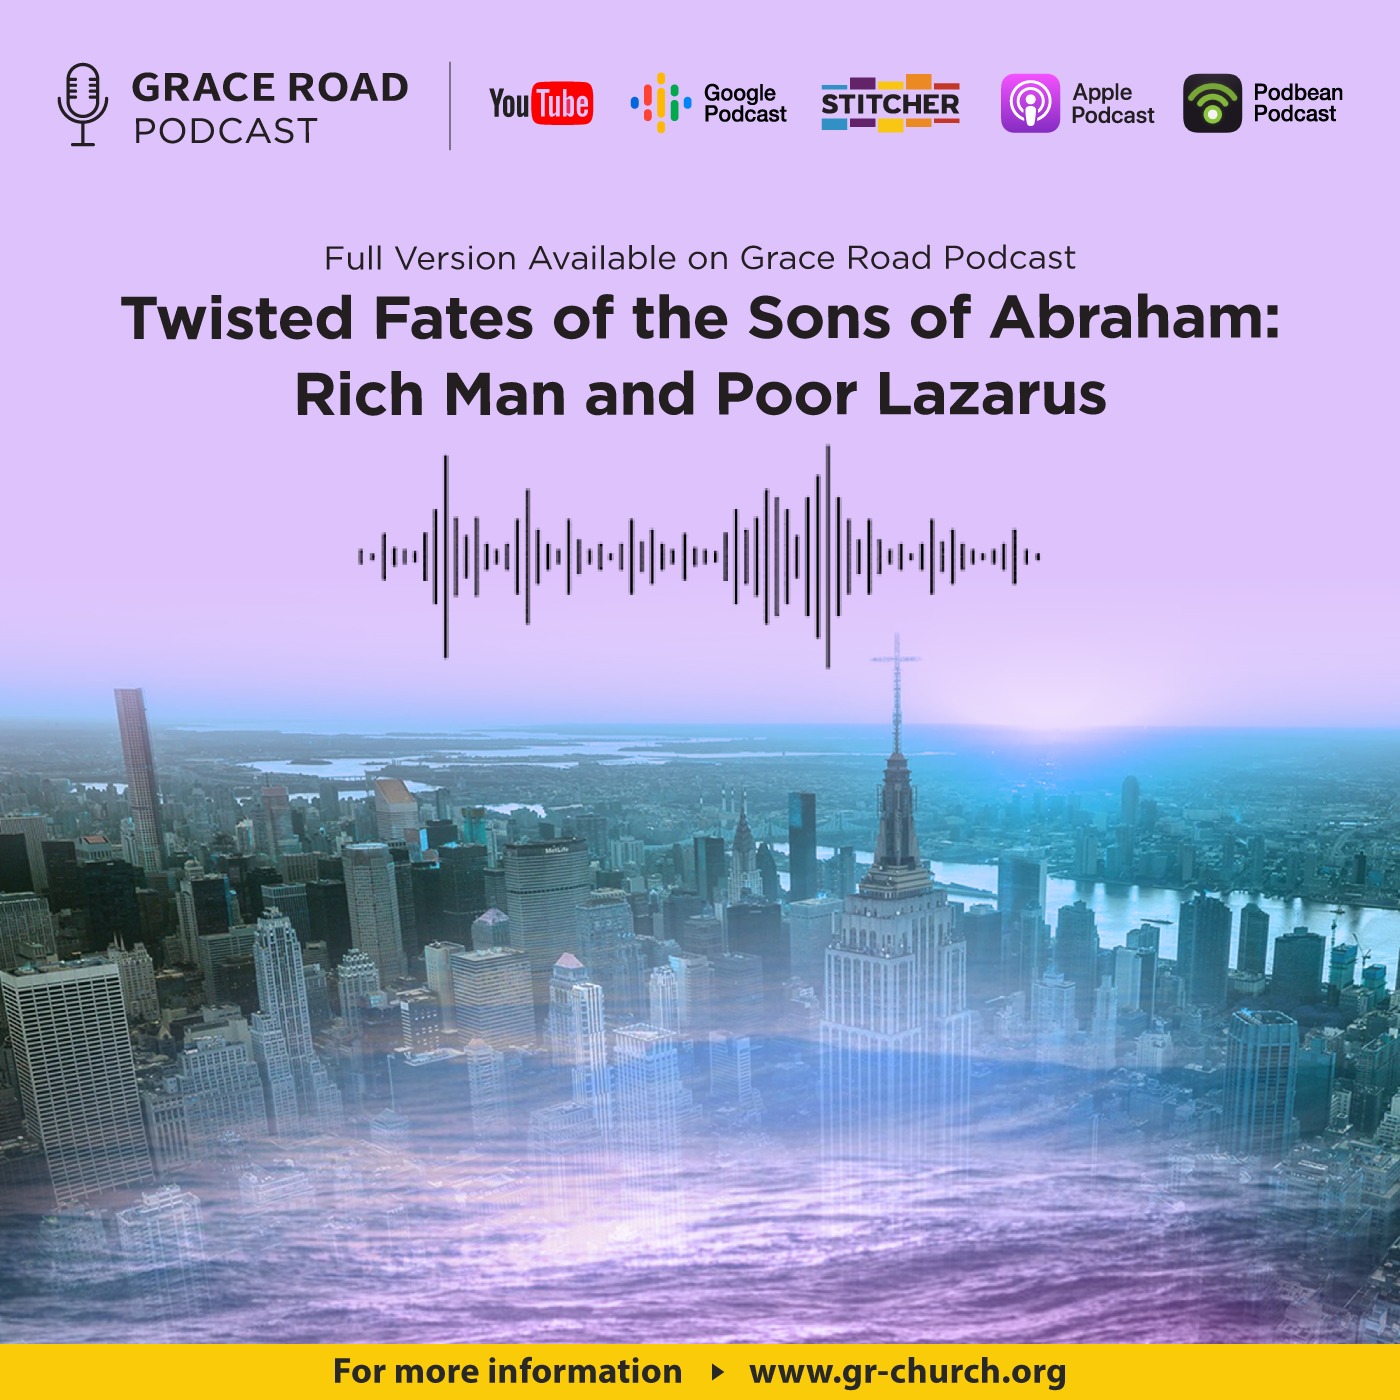 [Trailer] Twisted Fates of the Sons of Abraham: Rich Man and Poor Lazarus